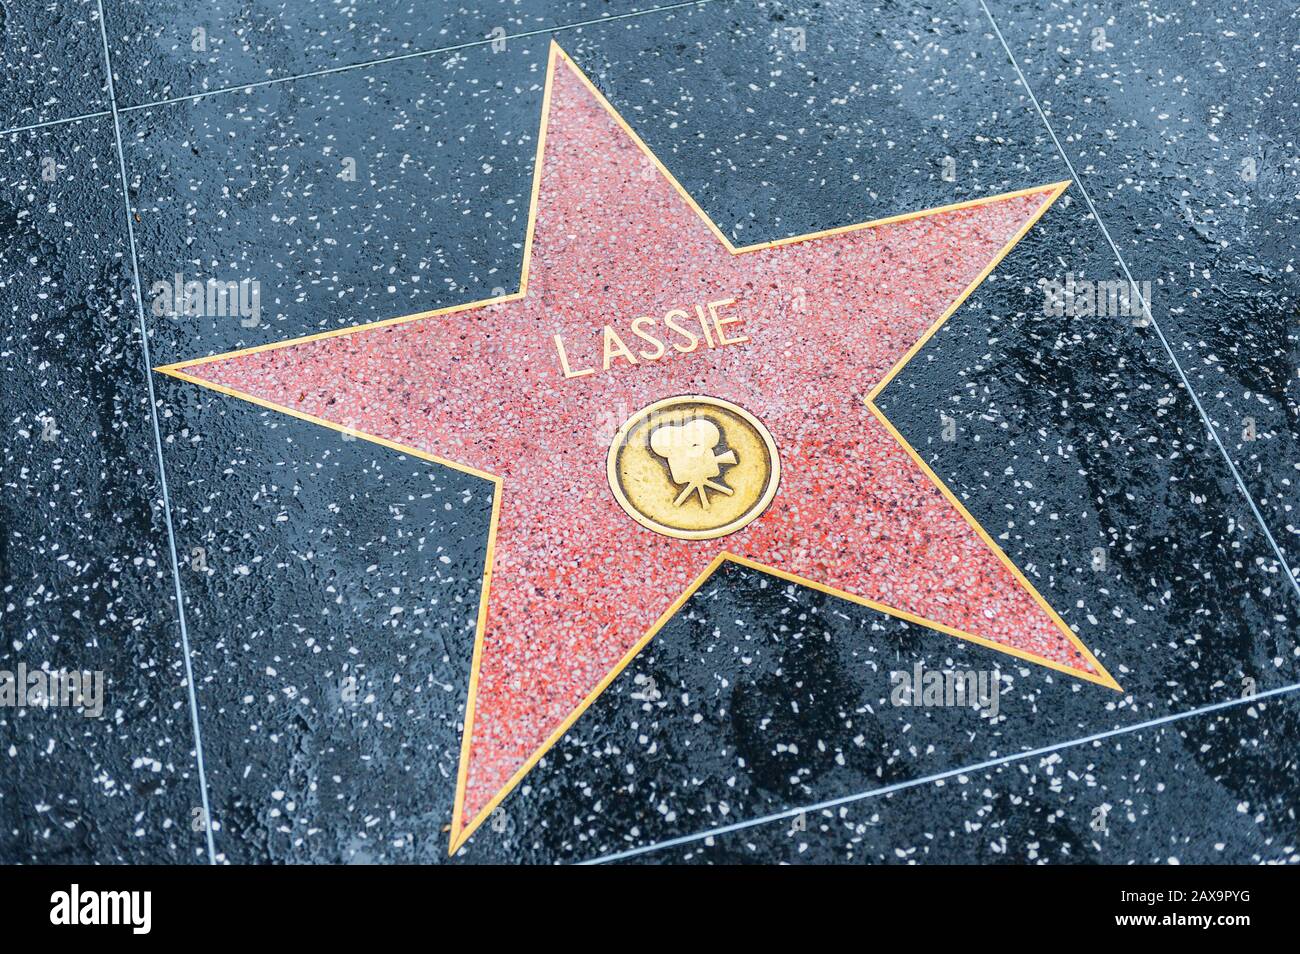 Lassie star on the Hollywood Walk of Fame in Hollywood, California, USA. Lassie was a fictional female rough collie dog. Stock Photo